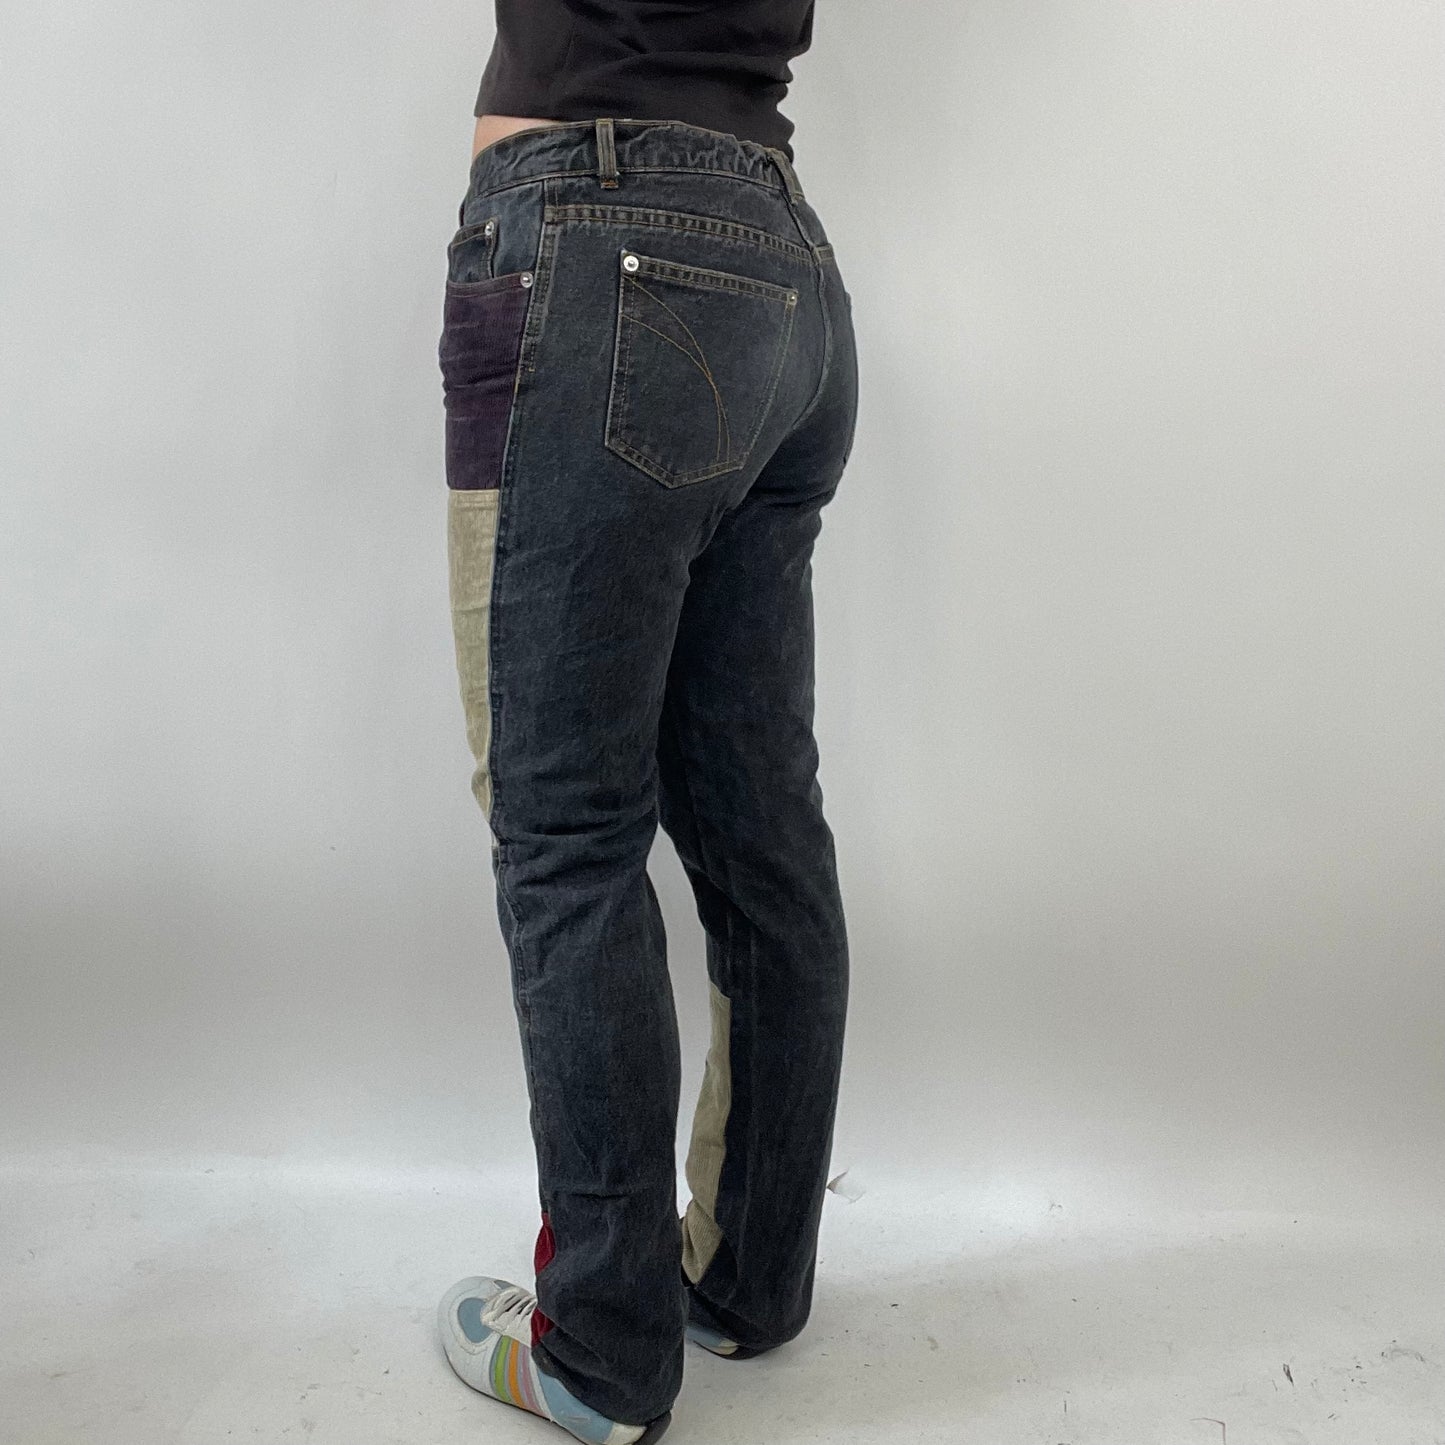 HIPPY CHIC DROP | small dark denim jeans with colourful corduroy patch detail